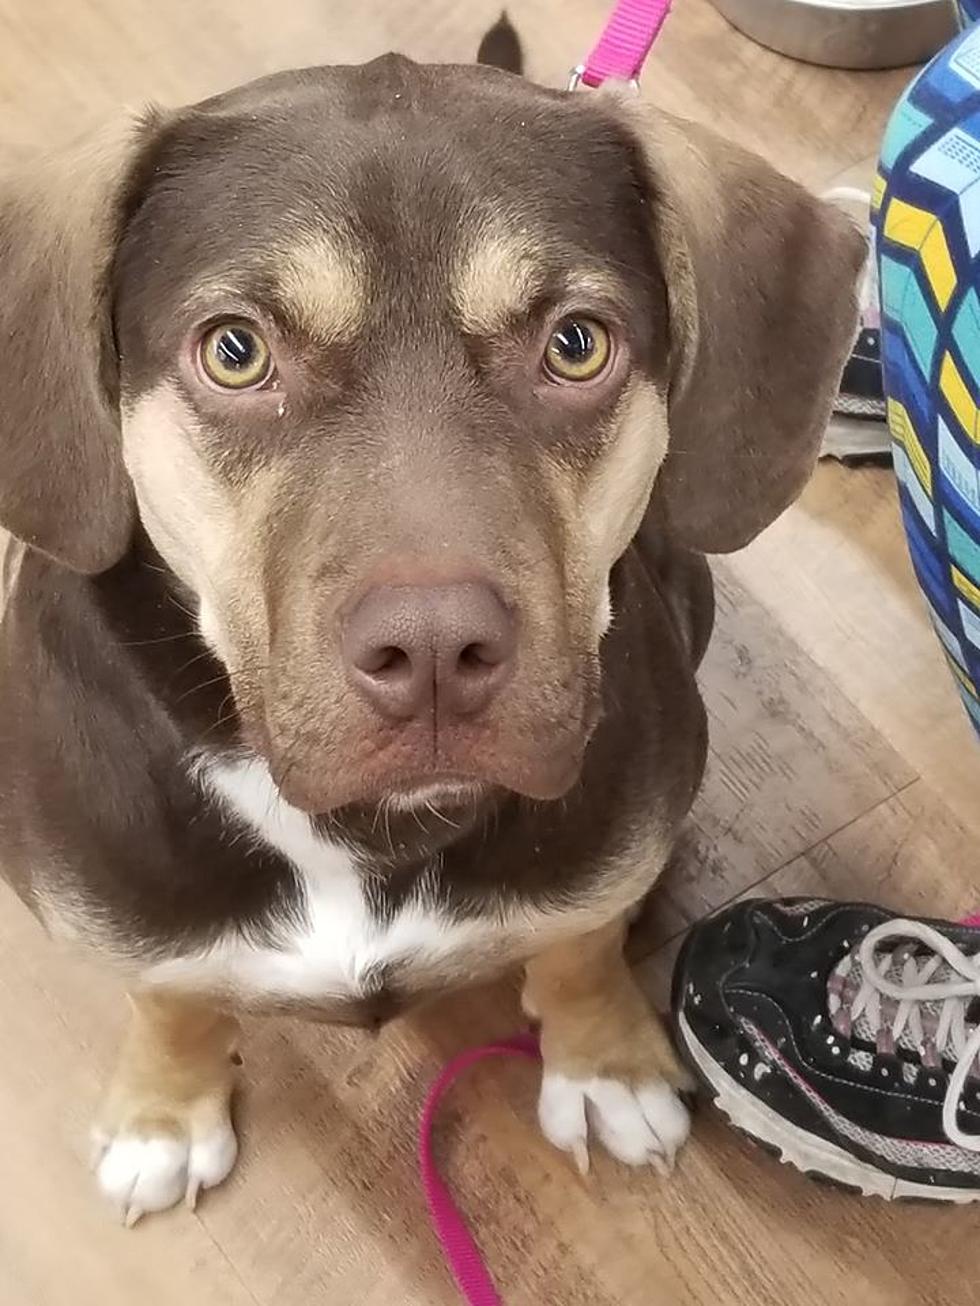 This Poor West MI Pup Needs A Home After Being In 5 Different Homes